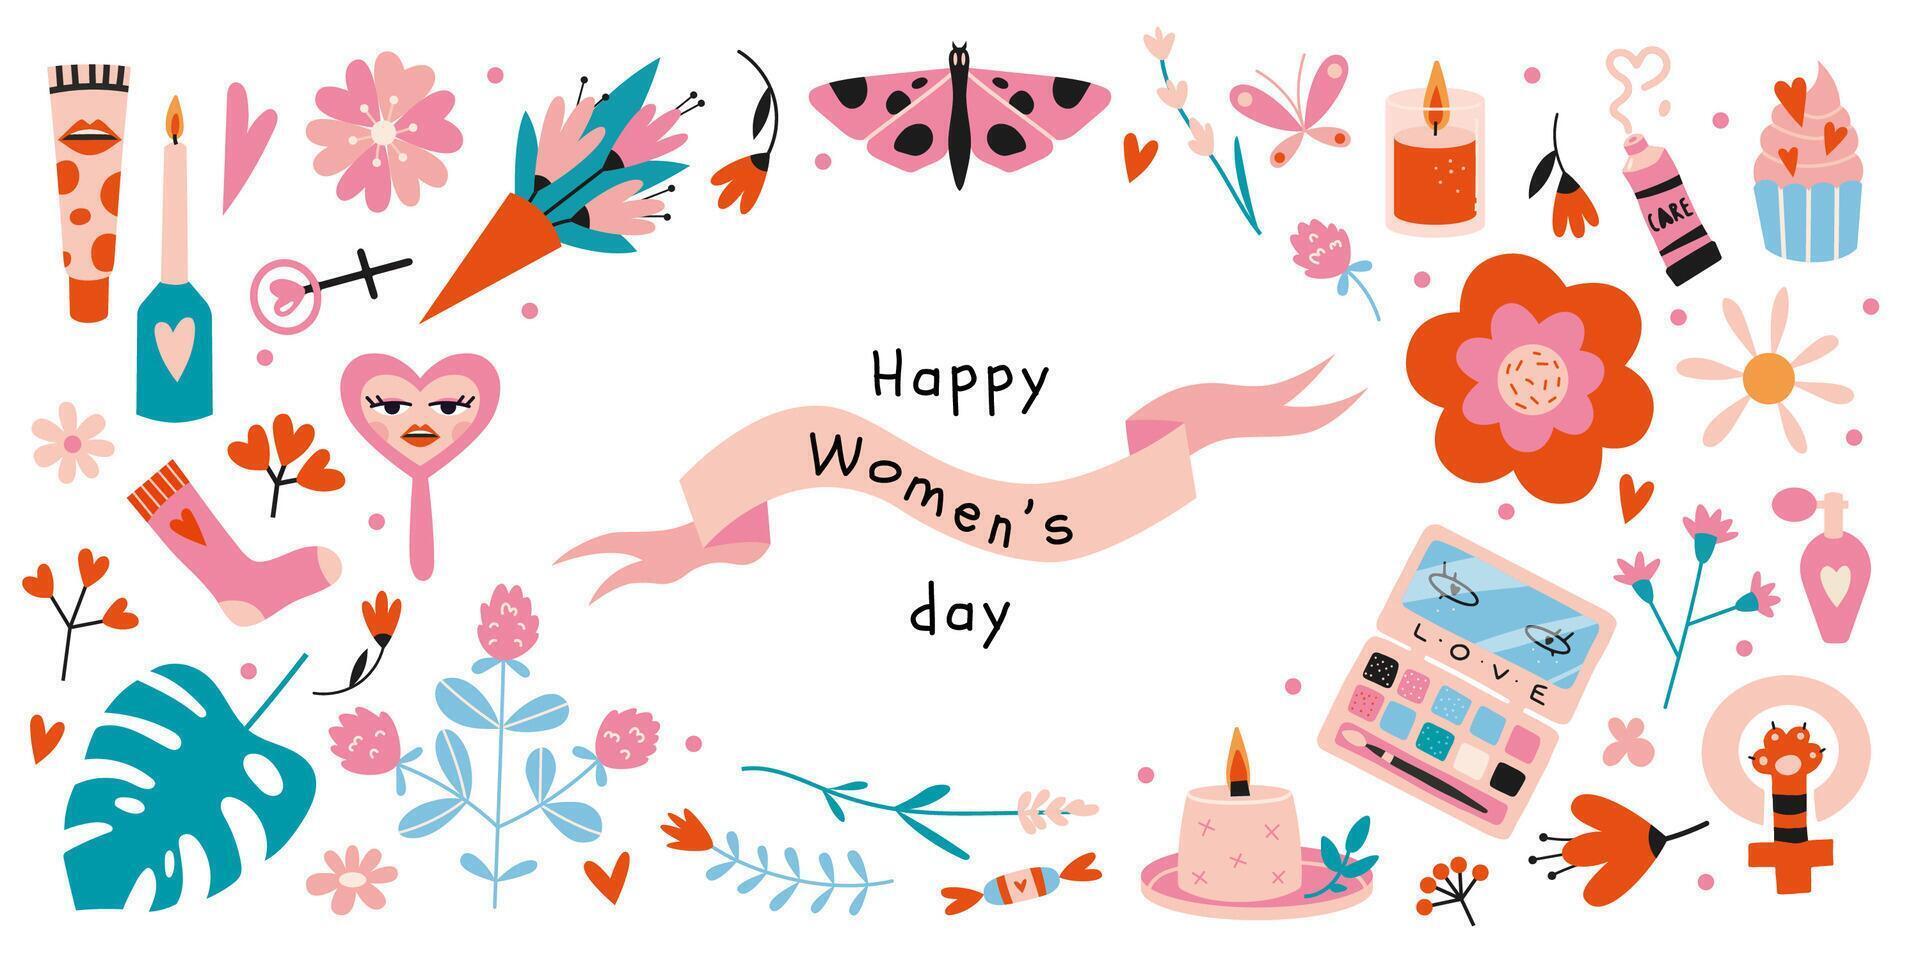 Set of Happy Women's Day elements, cartoon style. Various cute objects like flowers, cosmetics and hearts. Trendy modern vector illustration isolated on white, hand drawn, flat